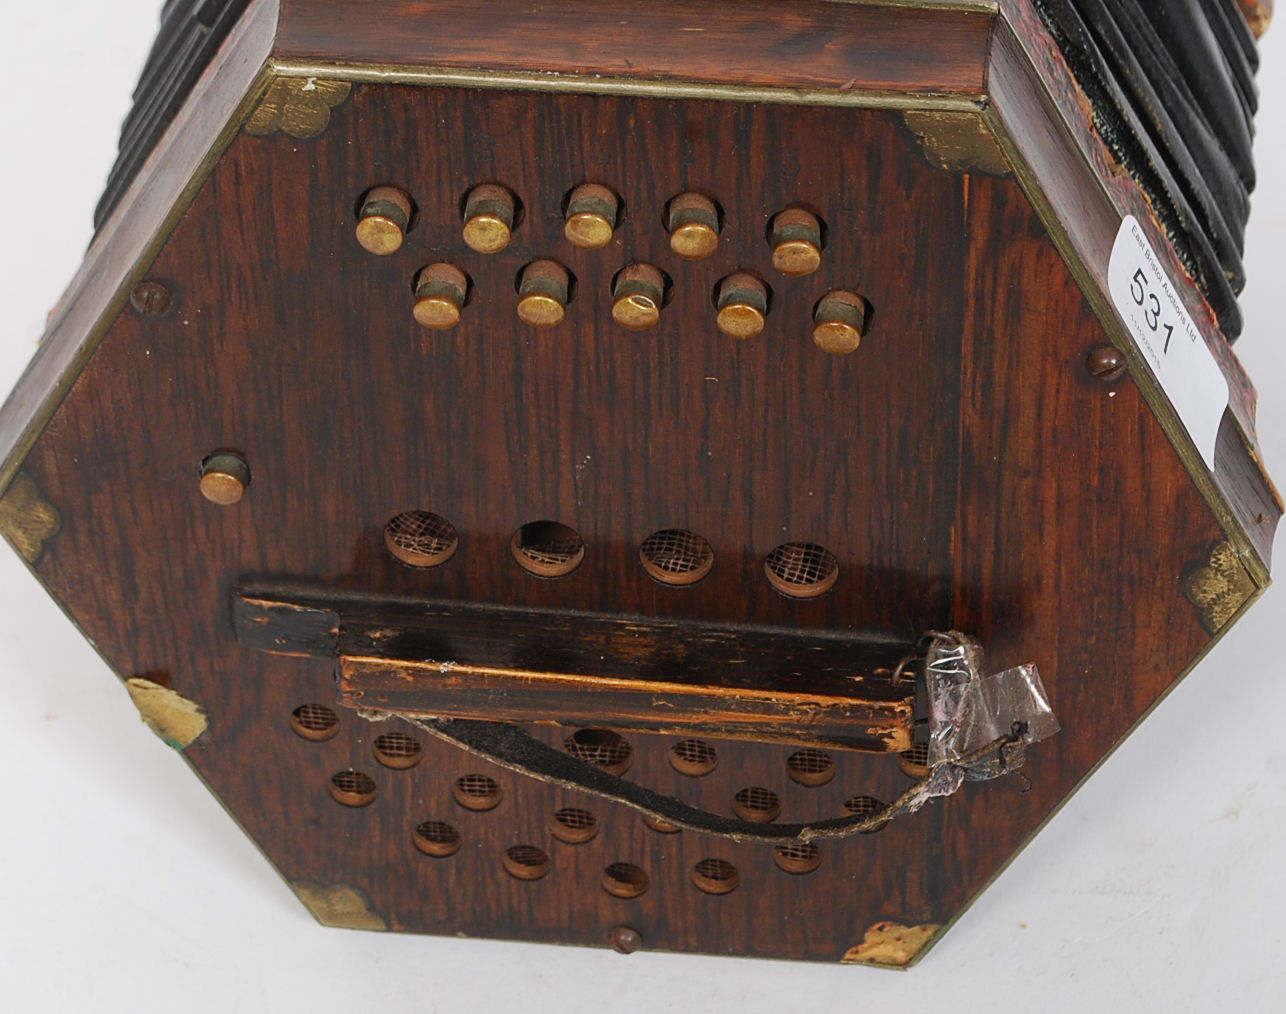 A vintage wooden squeeze box accordion instrument with central bellows and push buttons to both - Image 2 of 3